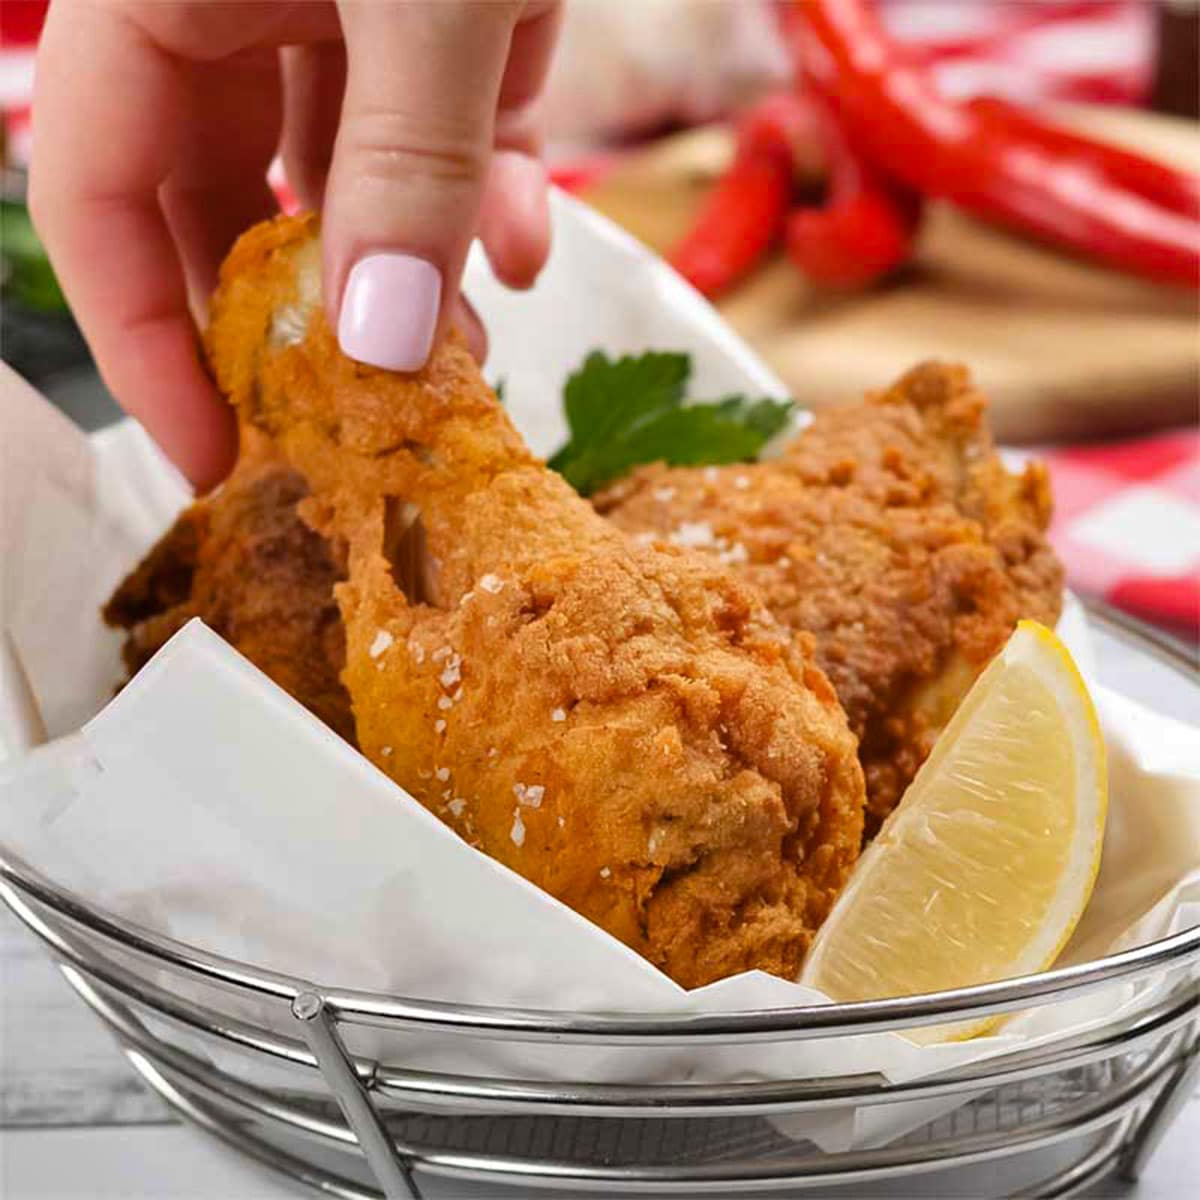 Keto hot and spicy fried chicken in a basket.